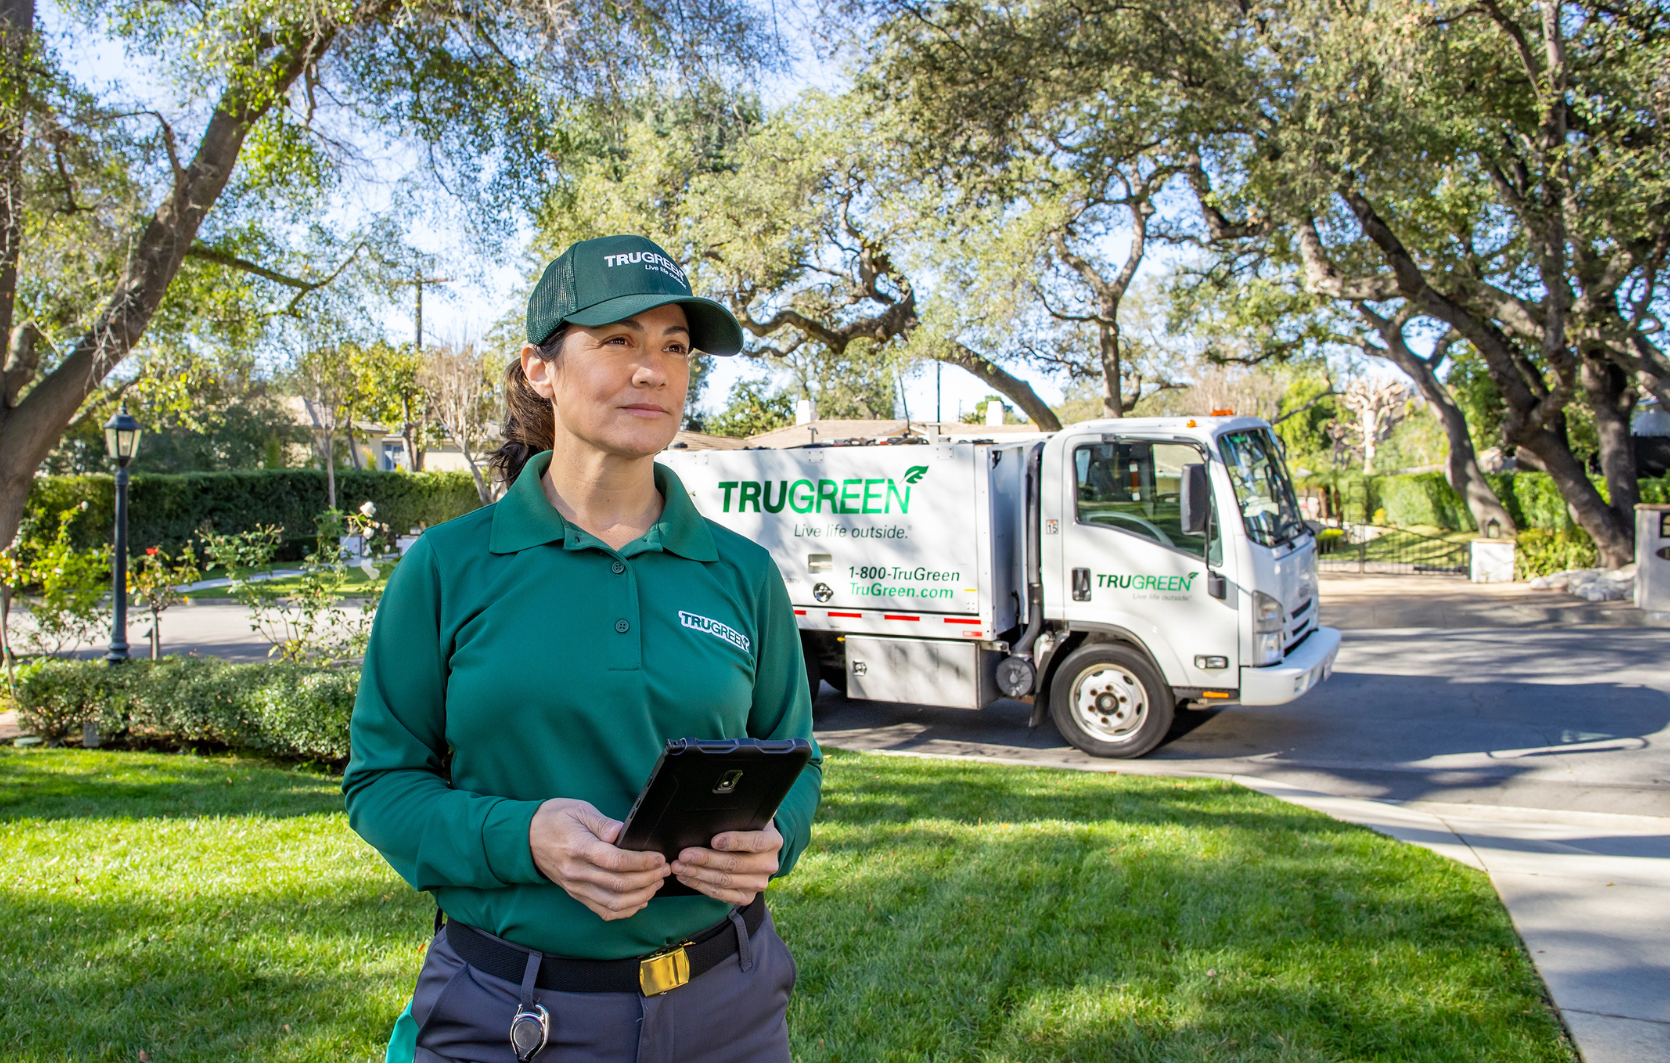 Lawn care specialist standing by truck